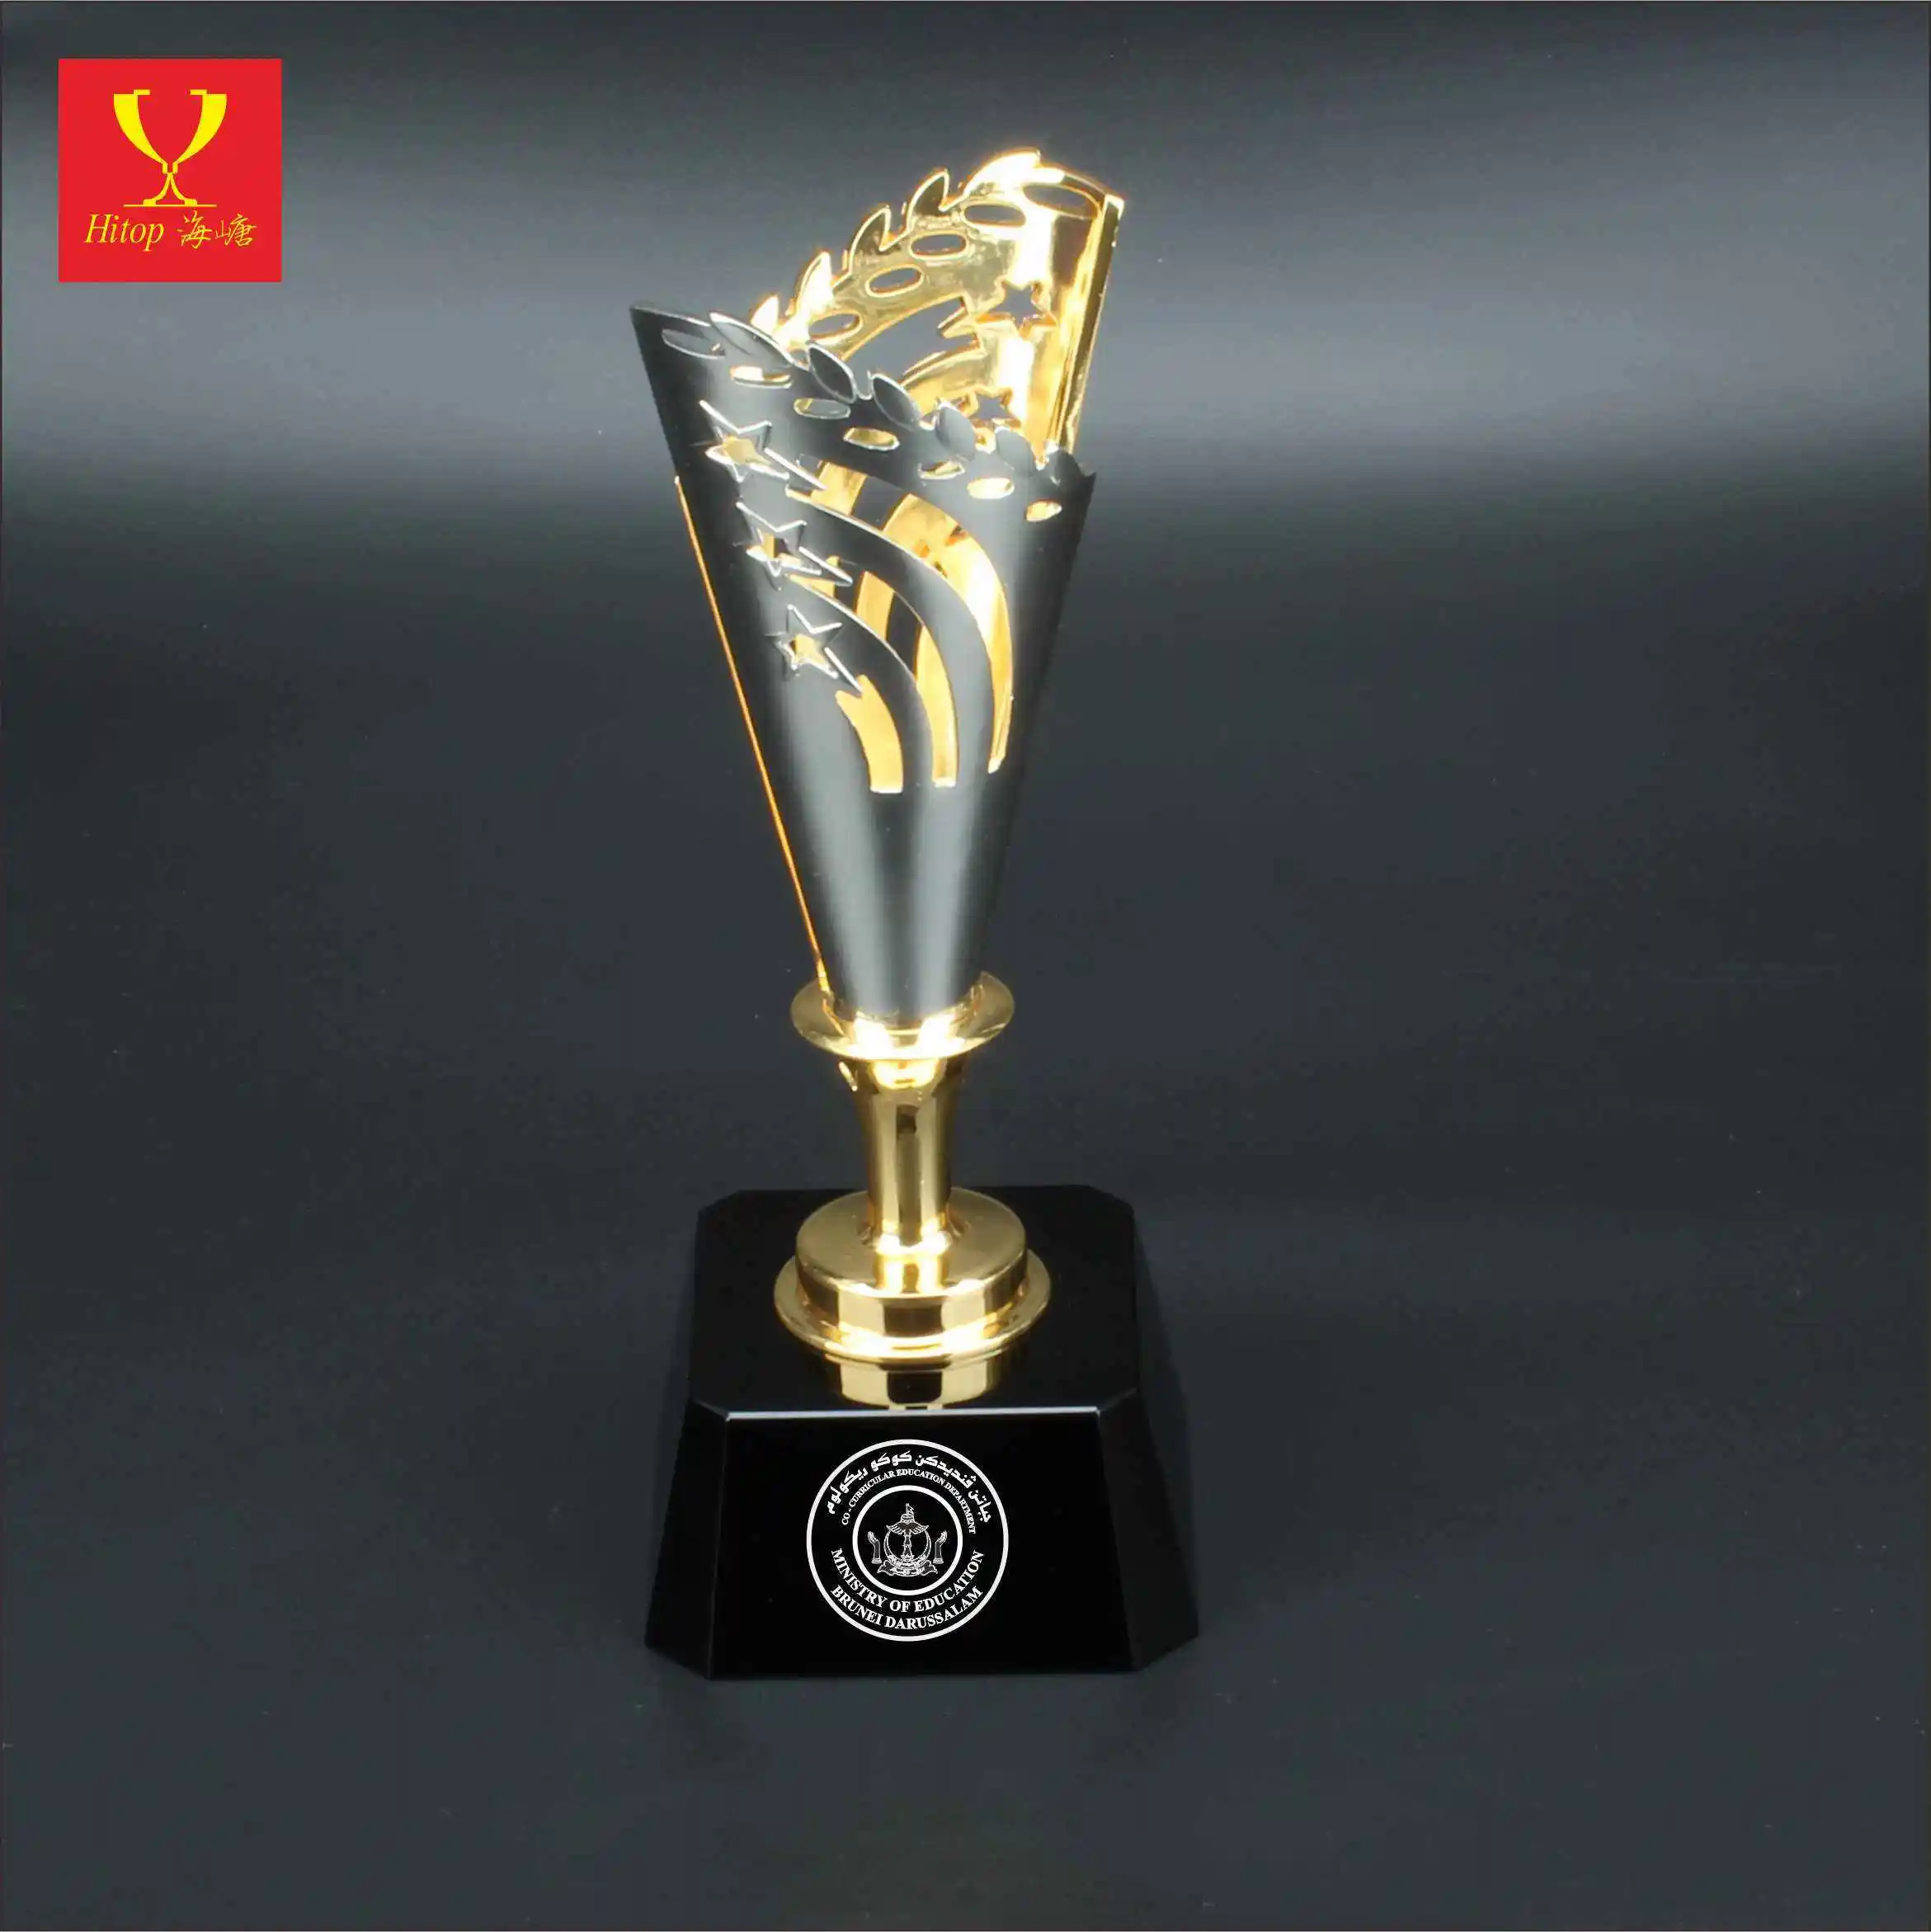 Hitop Prize Gift Personalized Engraved Custom Logo Beauty Trophy Cup Award Gold Sliver Manufacturer Creative Gift Box Sports